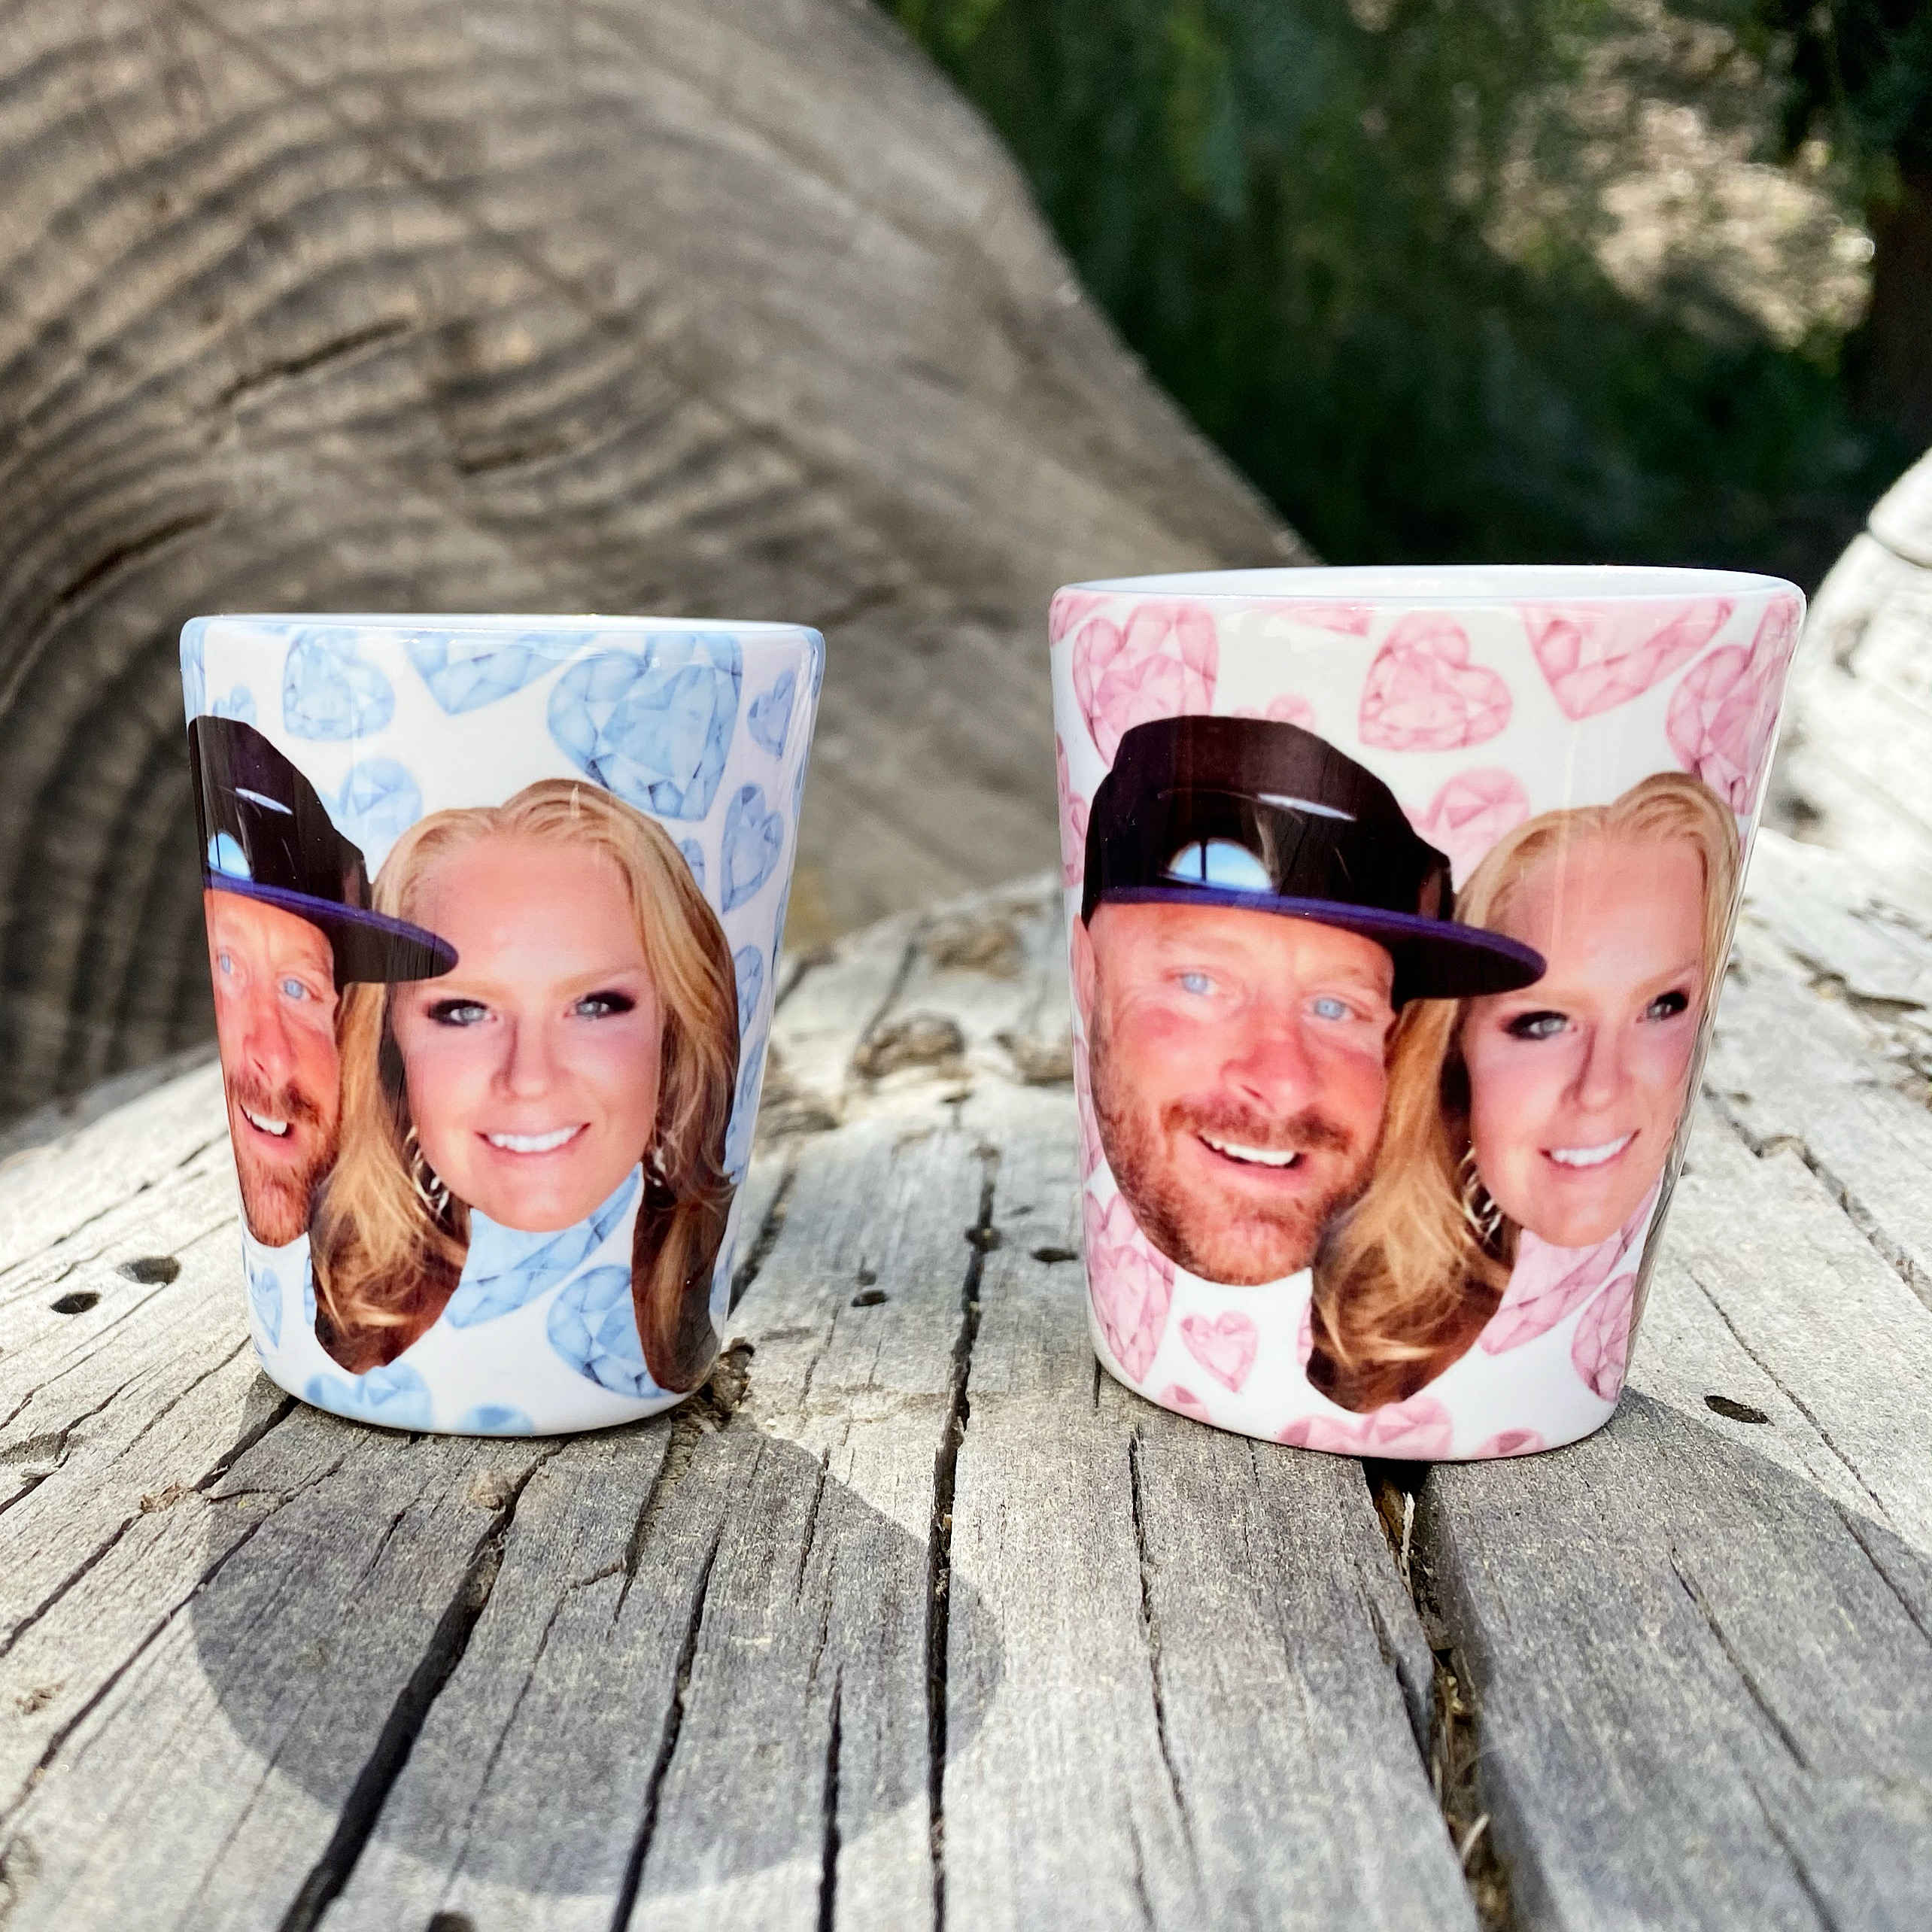 Set of Shot Glasses for the bride and groom.